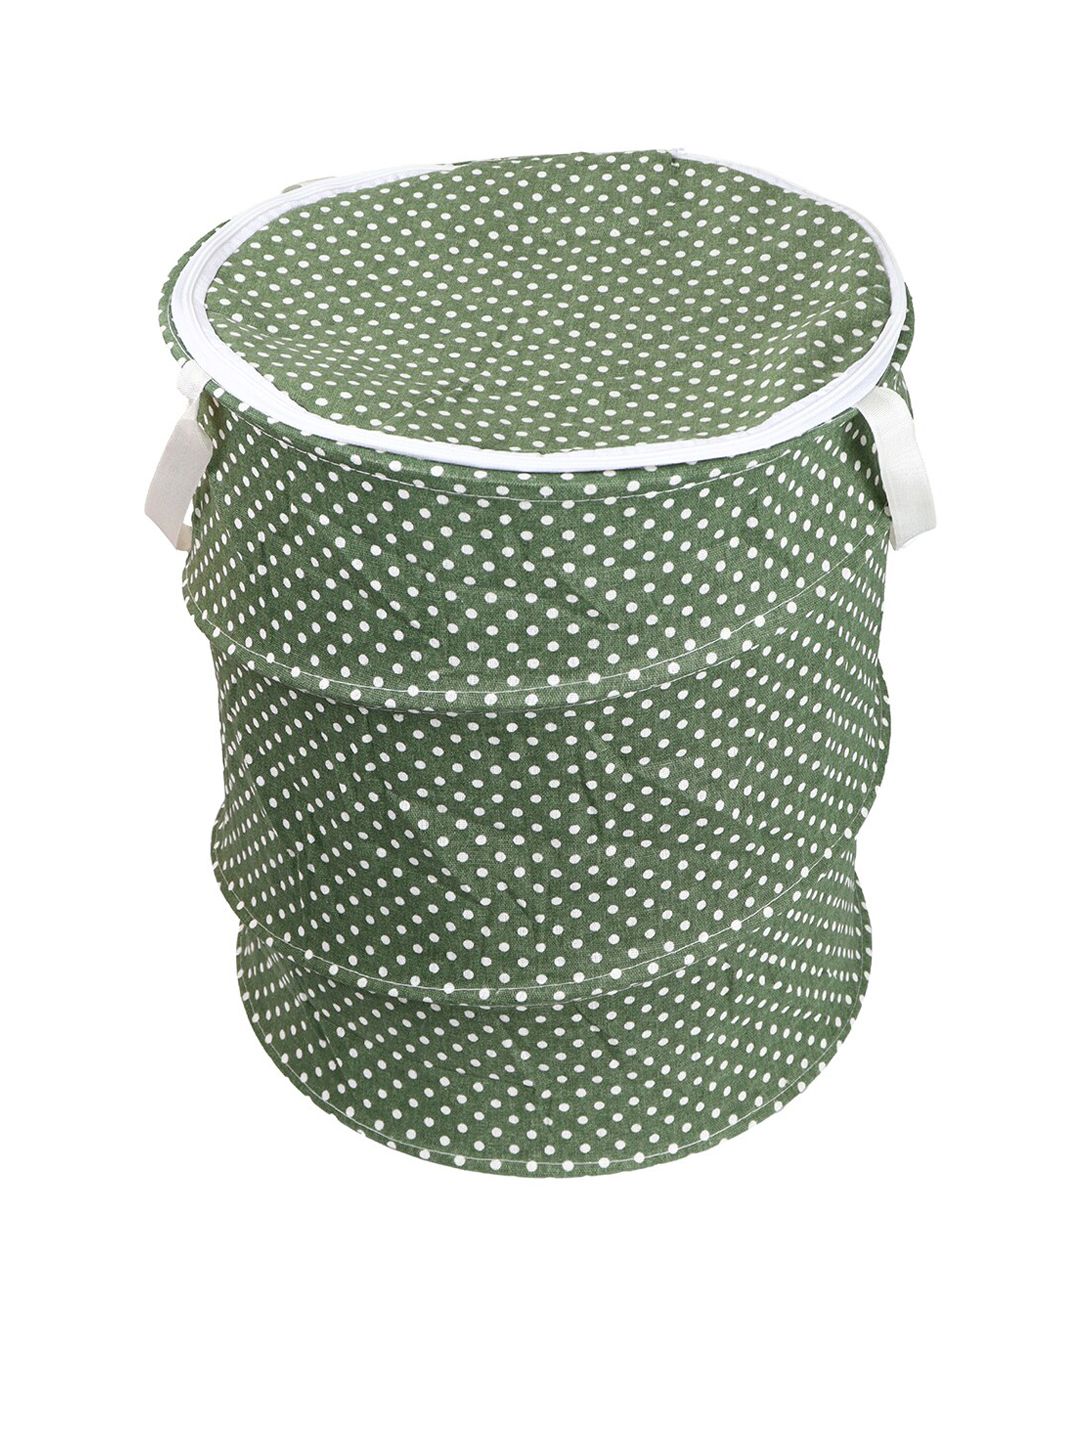 OddCroft Green & White Polka Dots Foldable Laundry Basket Price in India